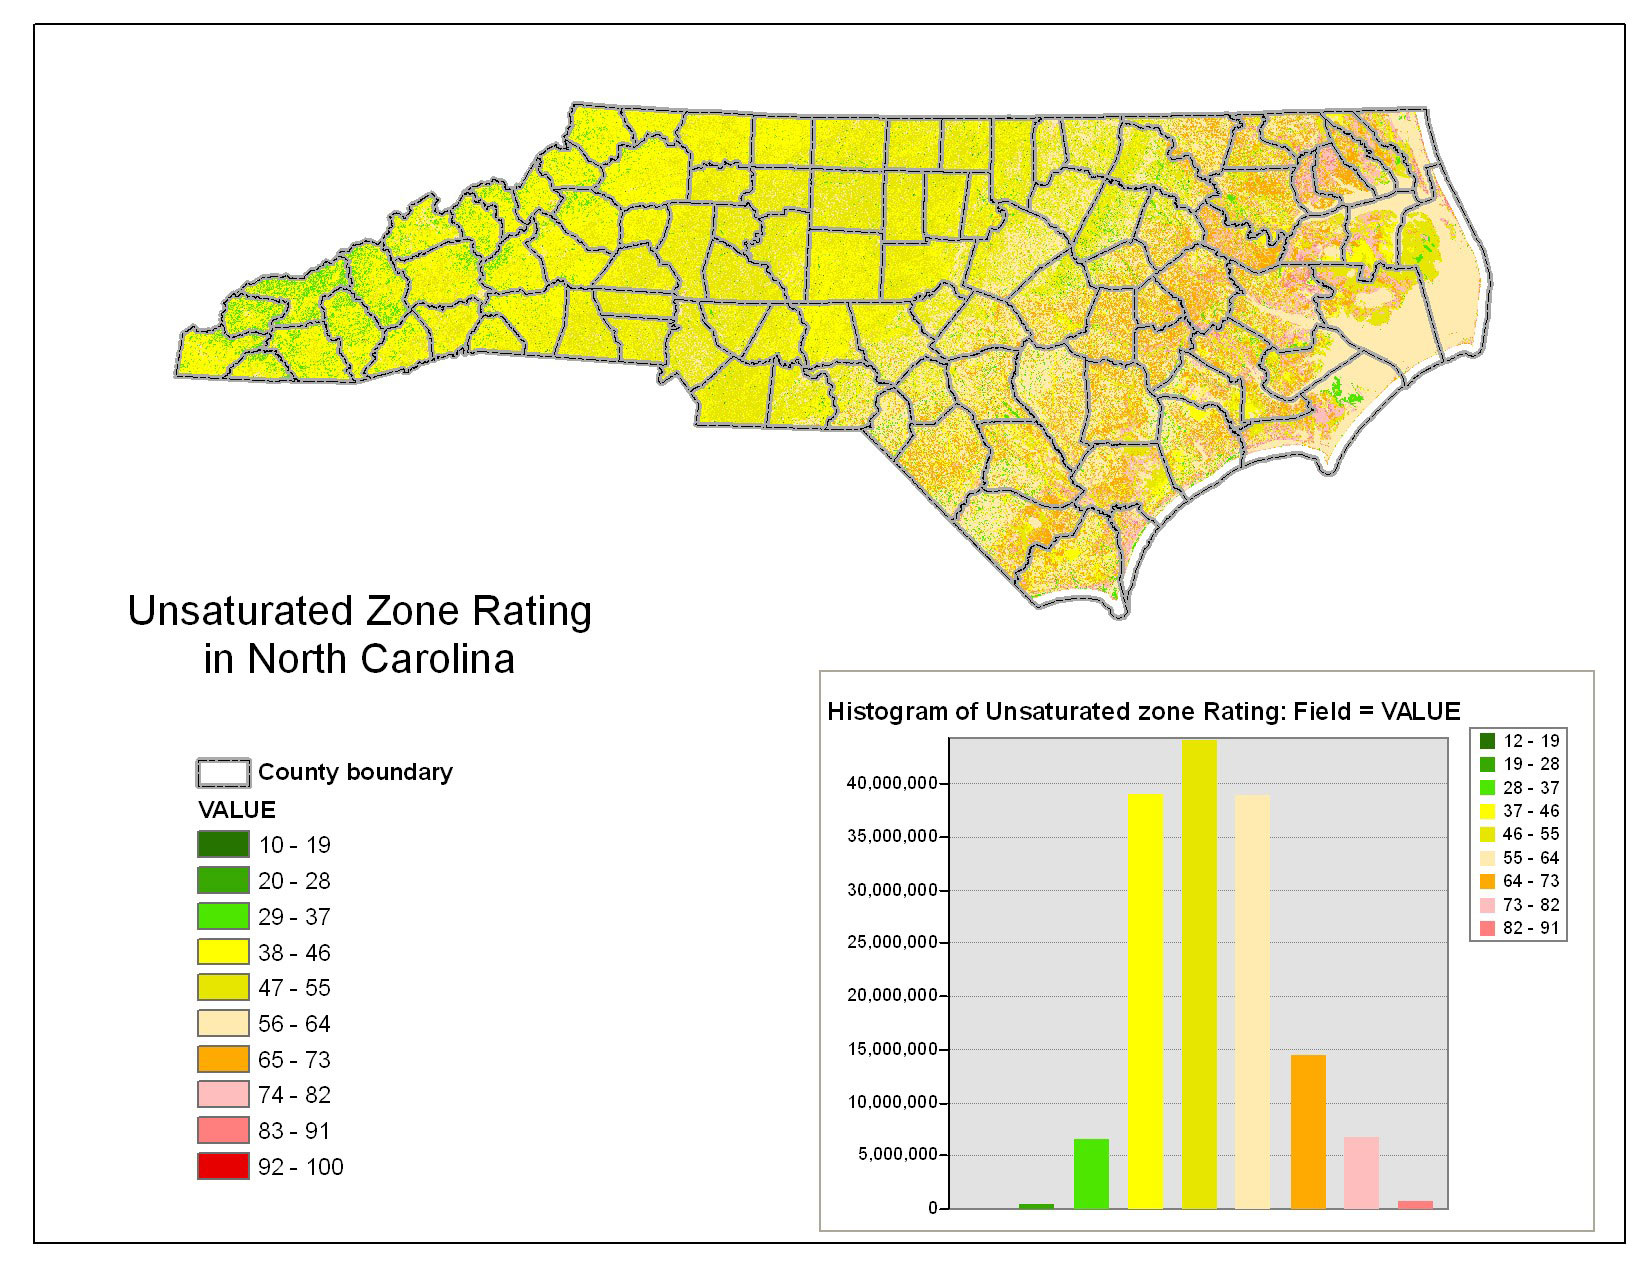 The unsaturated zone ratings for North Carolina